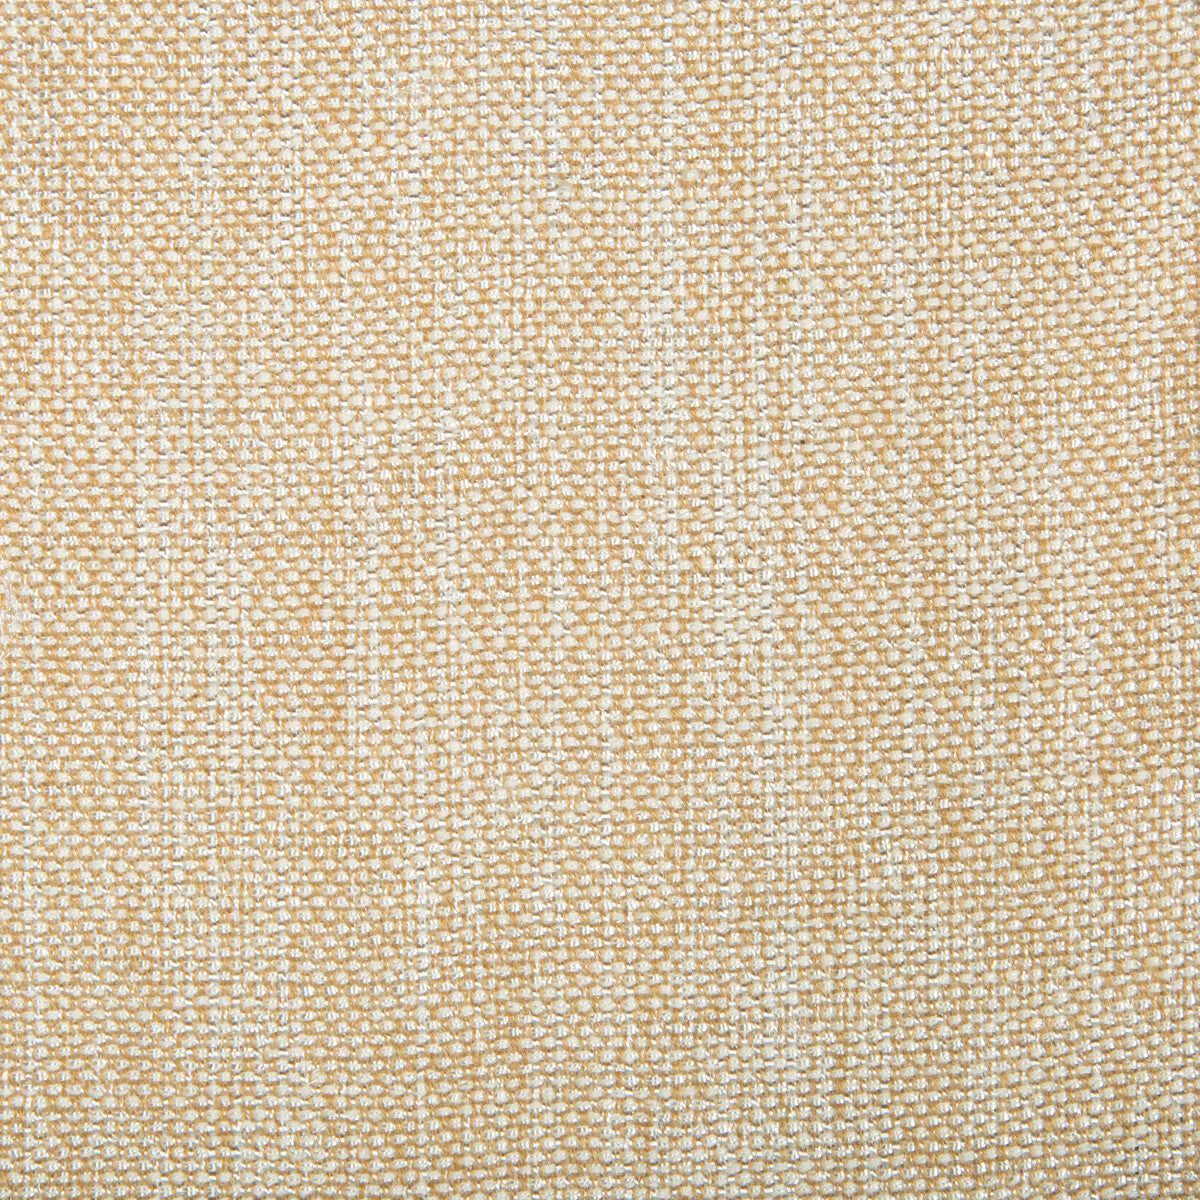 Kravet Contract fabric in 4458-1601 color - pattern 4458.1601.0 - by Kravet Contract